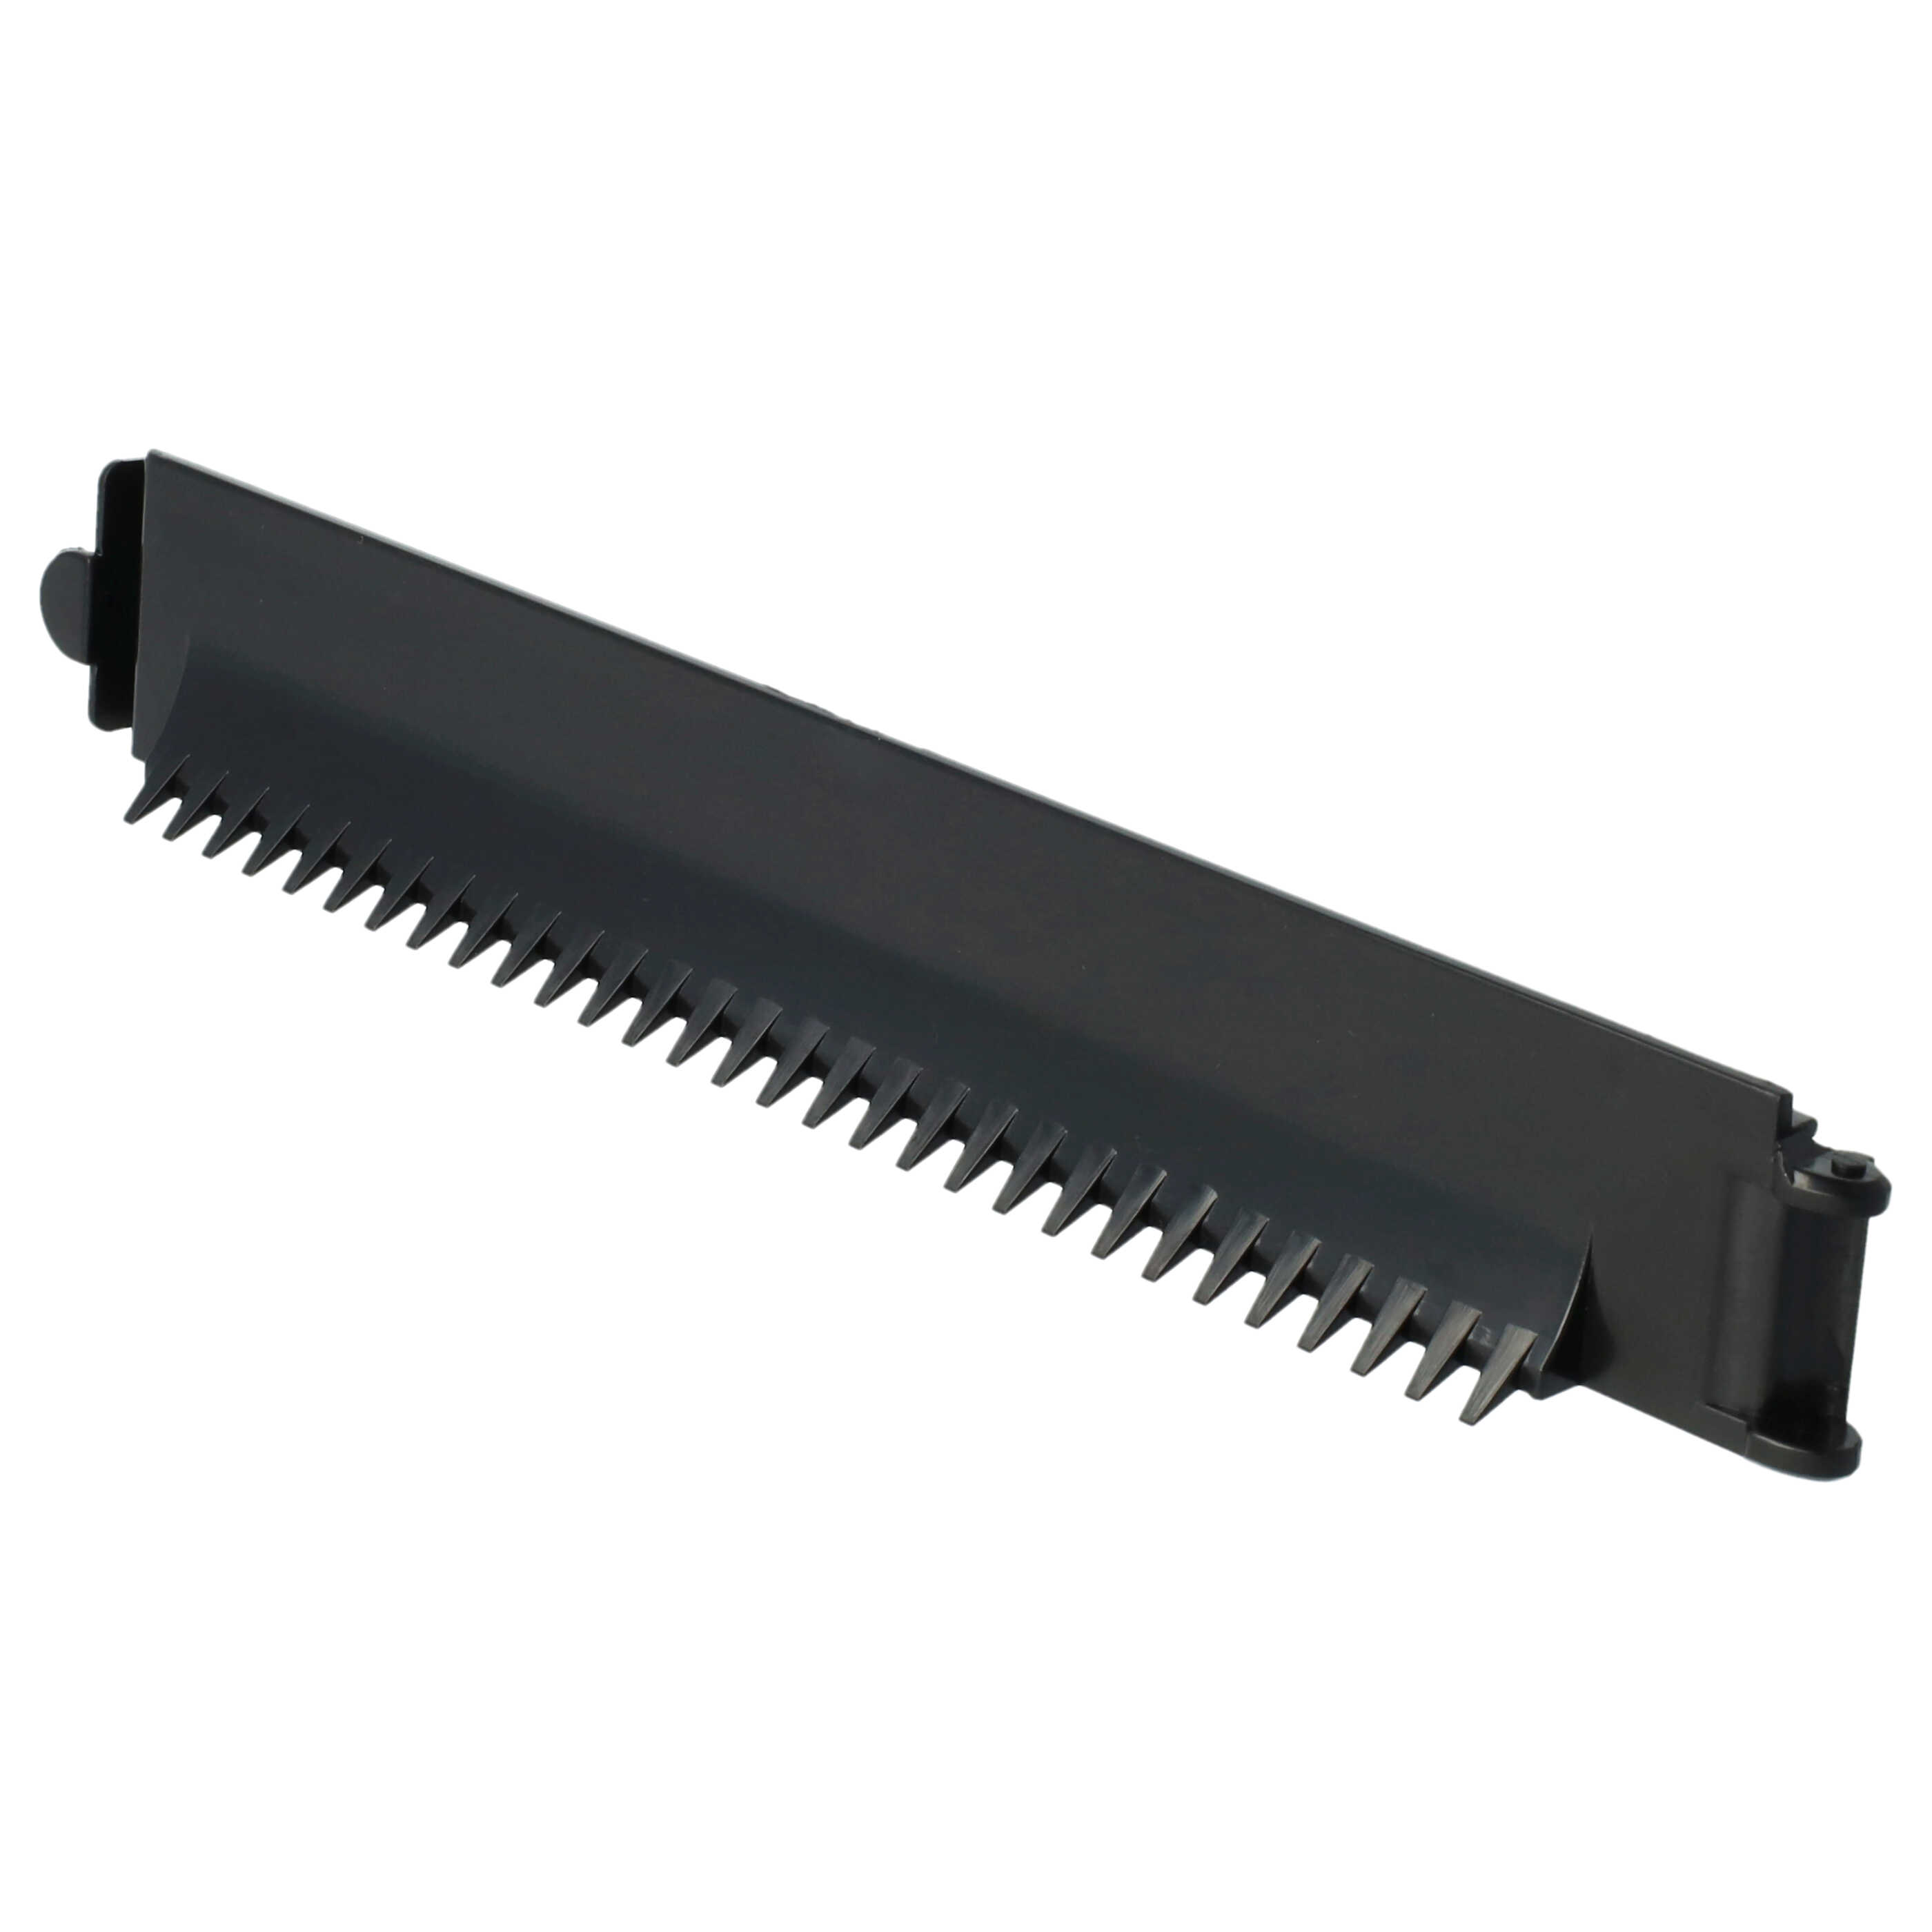 Door Flap for iRobot Roomba Robot Vacuum Cleaner etc. - with Teeth for Combing out the Round Brush